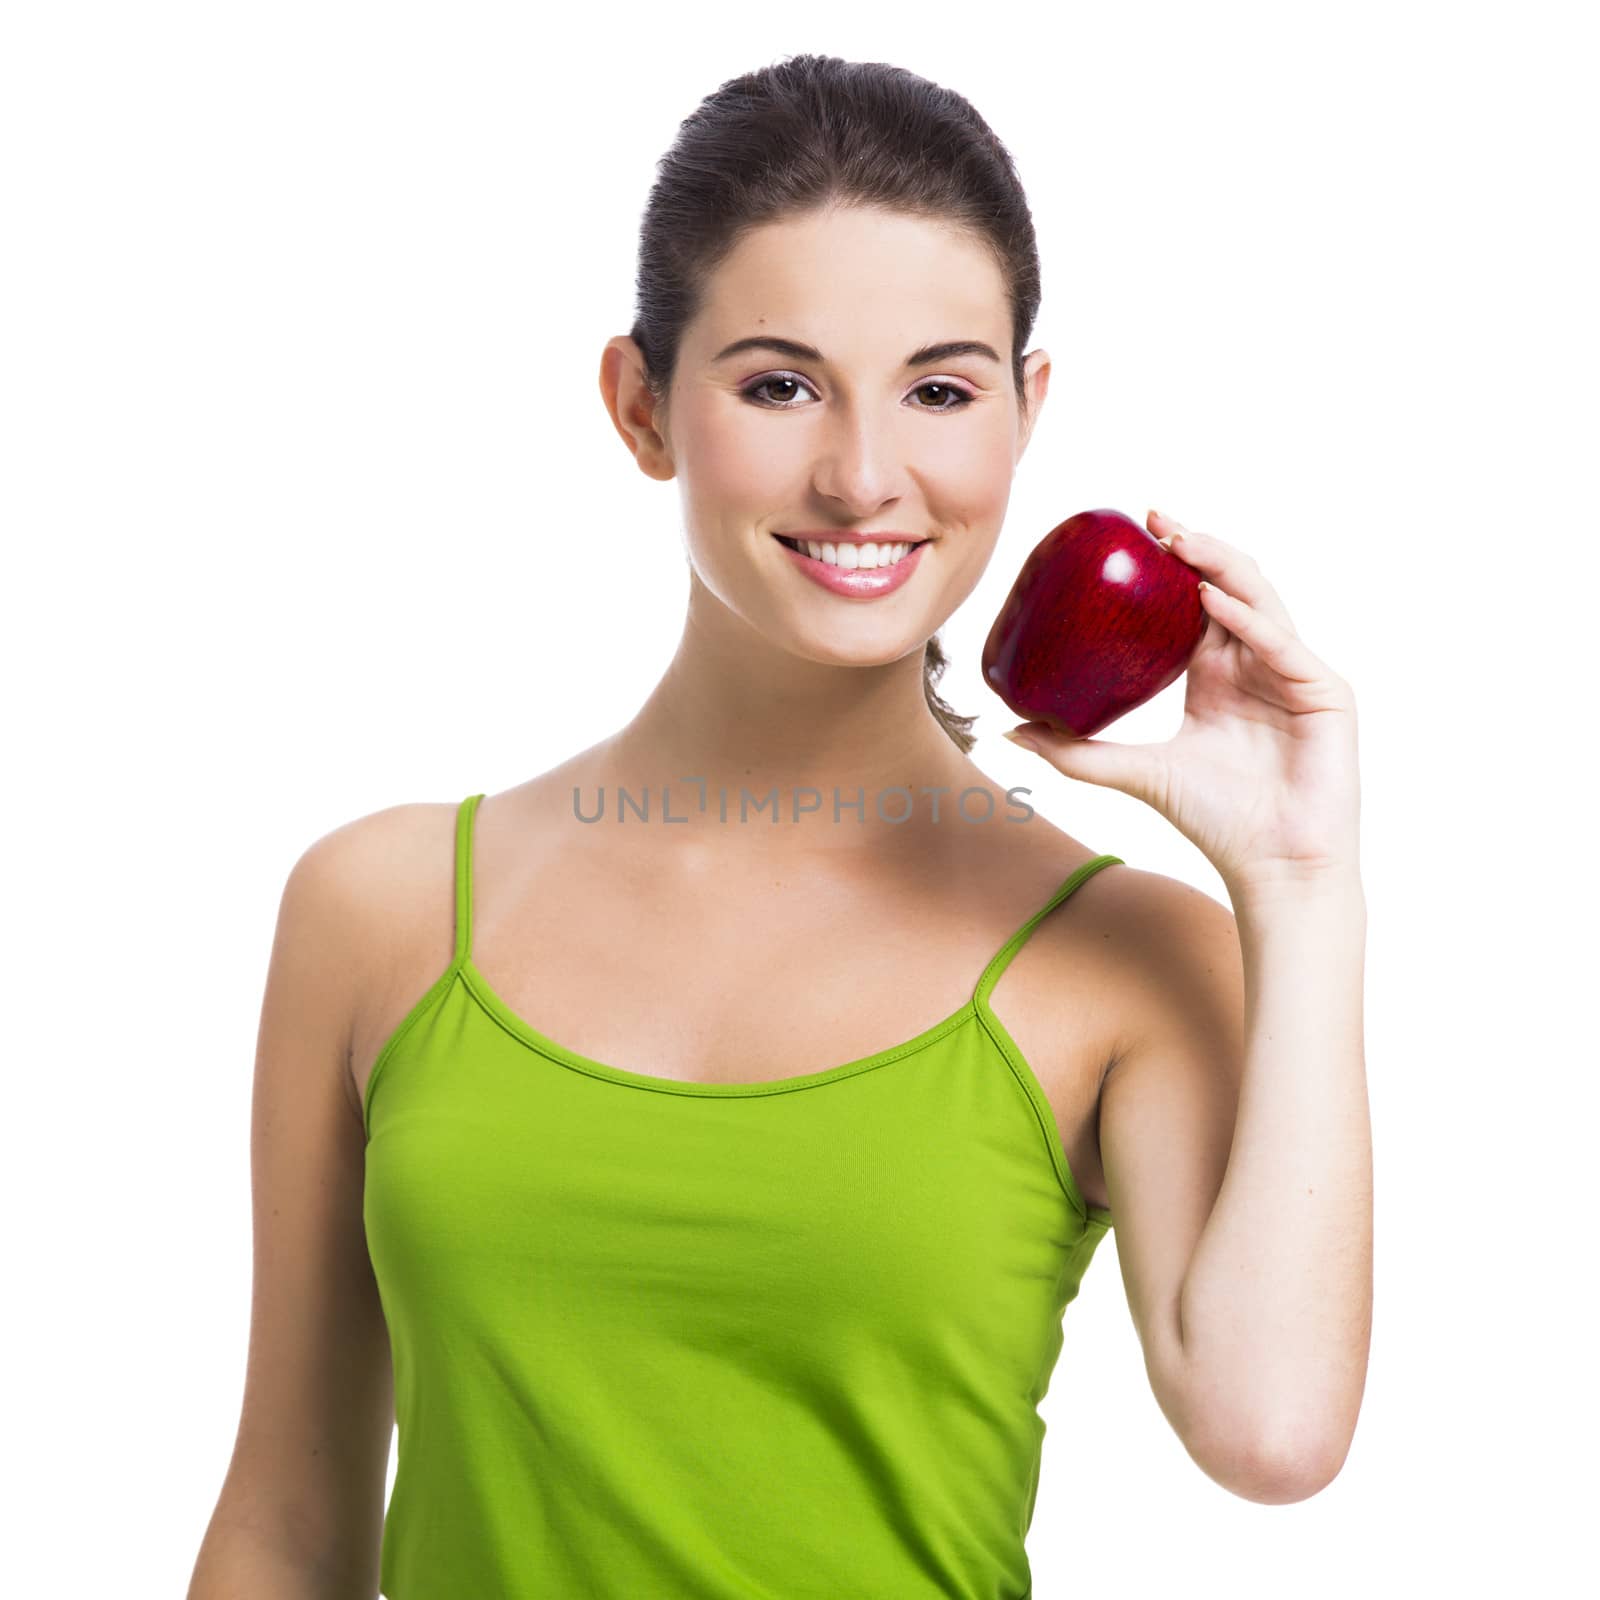 Healthy woman holding an apple by Iko